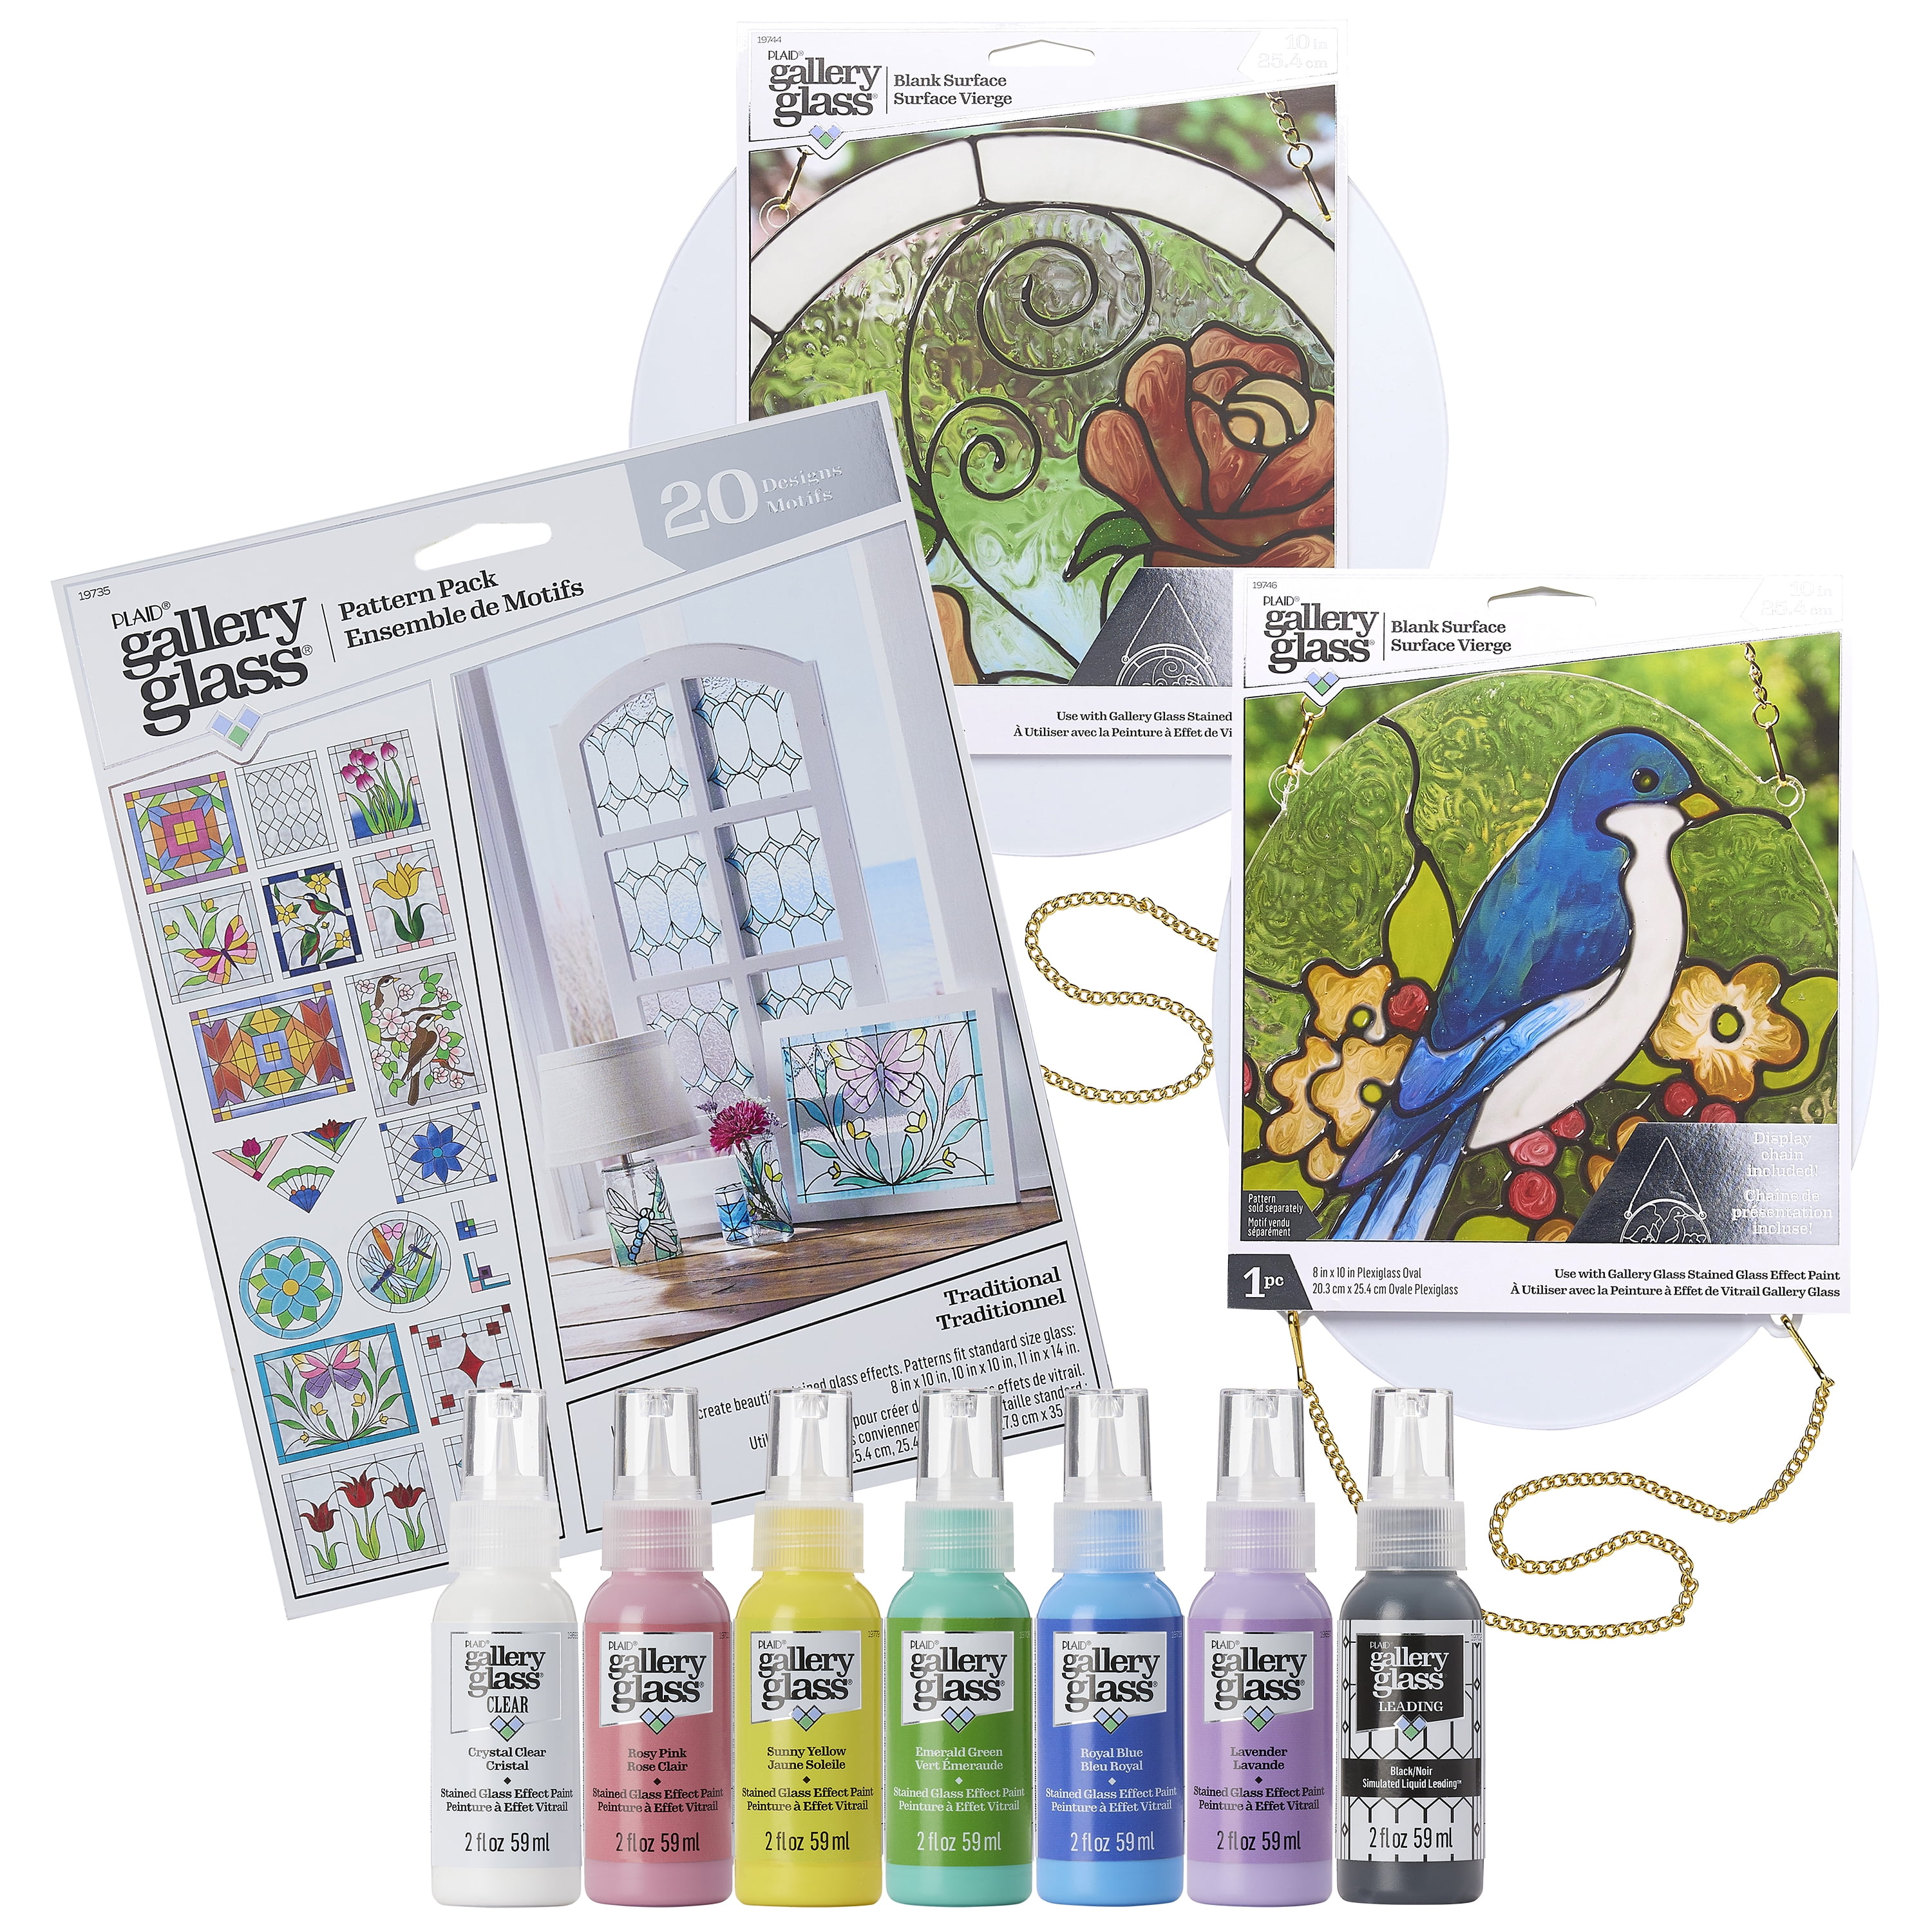  Gallery Glass Pastels PROMOGGPLL22 Stained Kit, 8 Piece Glass  Paint Set for DIY Arts and Crafts, Perfect for Beginners and Artists